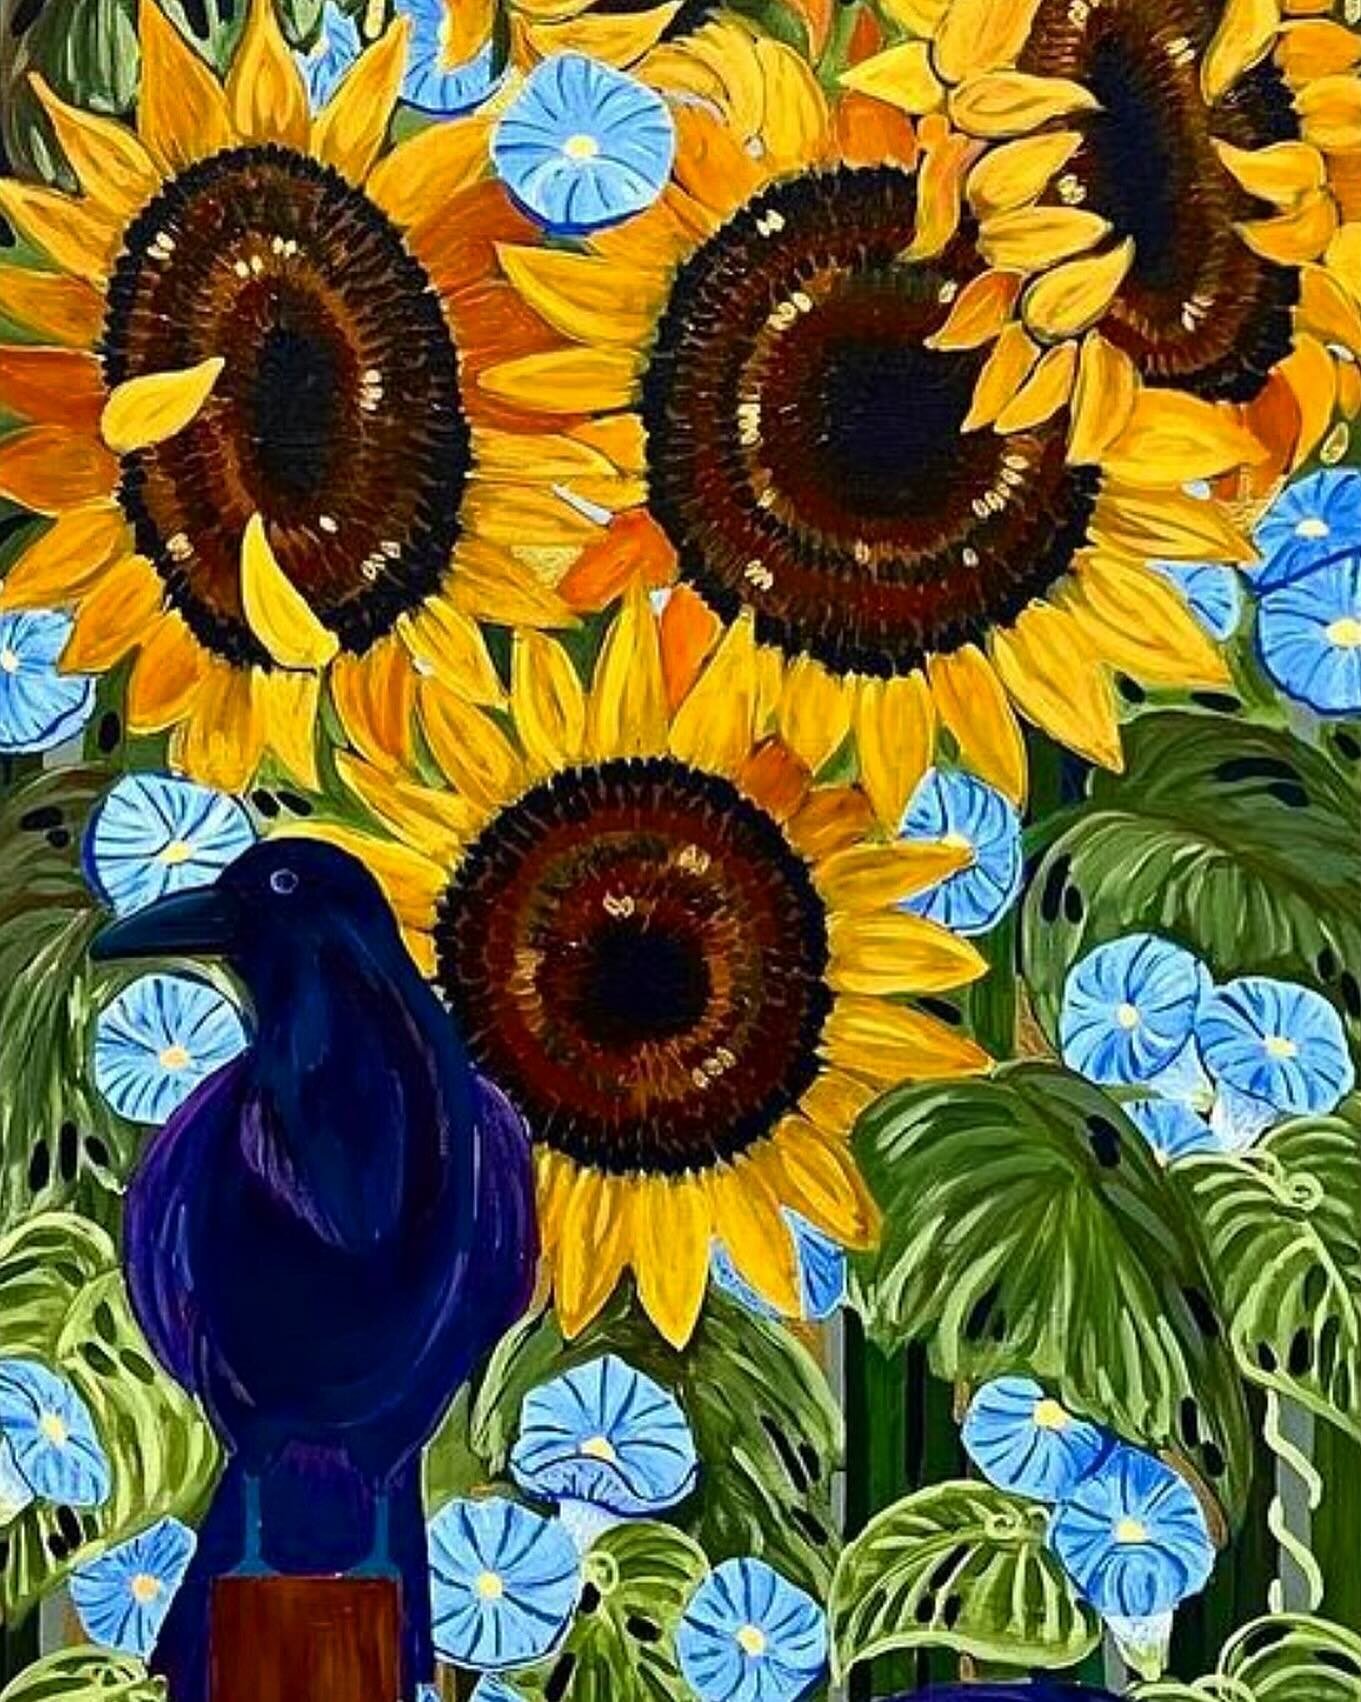 A personal favorite that&rsquo;s had a place in my home for several years now. I fell in love with this painting the minute I started it and knew right away that it wouldn&rsquo;t be leaving my walls. I love the brightness of the sunflowers contraste